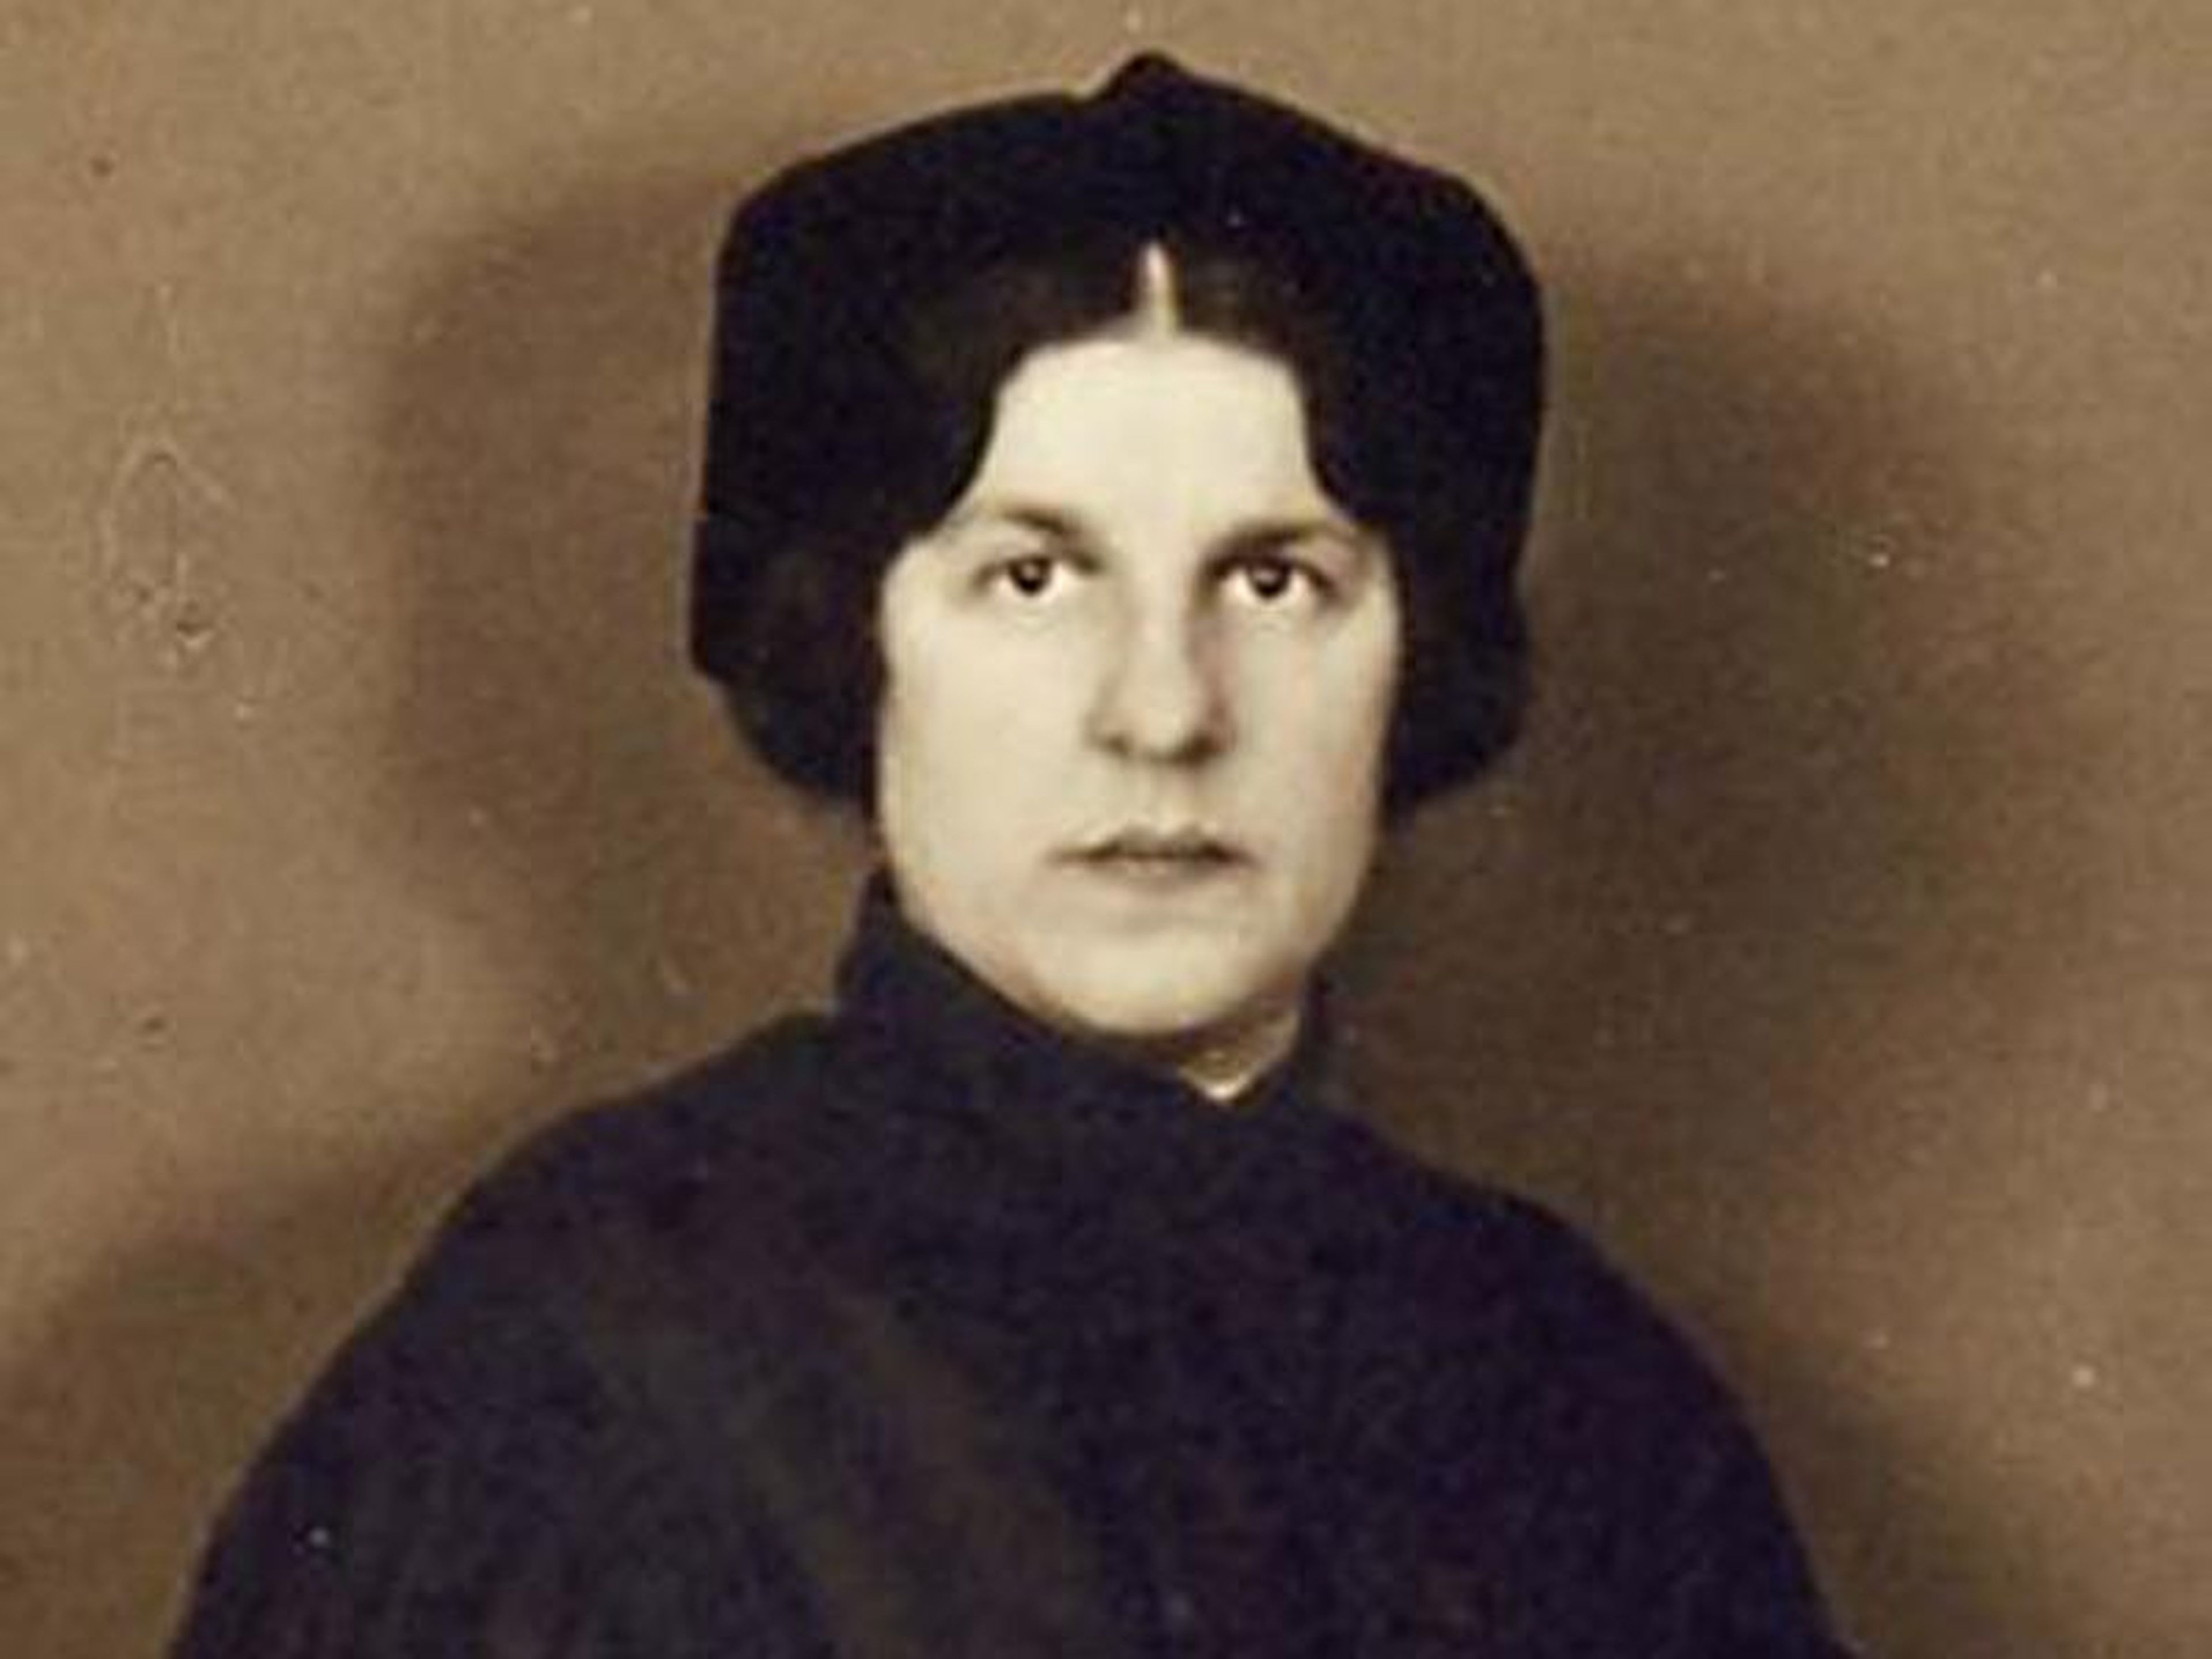 Regina Jonas was the first woman ever ordained as a rabbi in 1935.